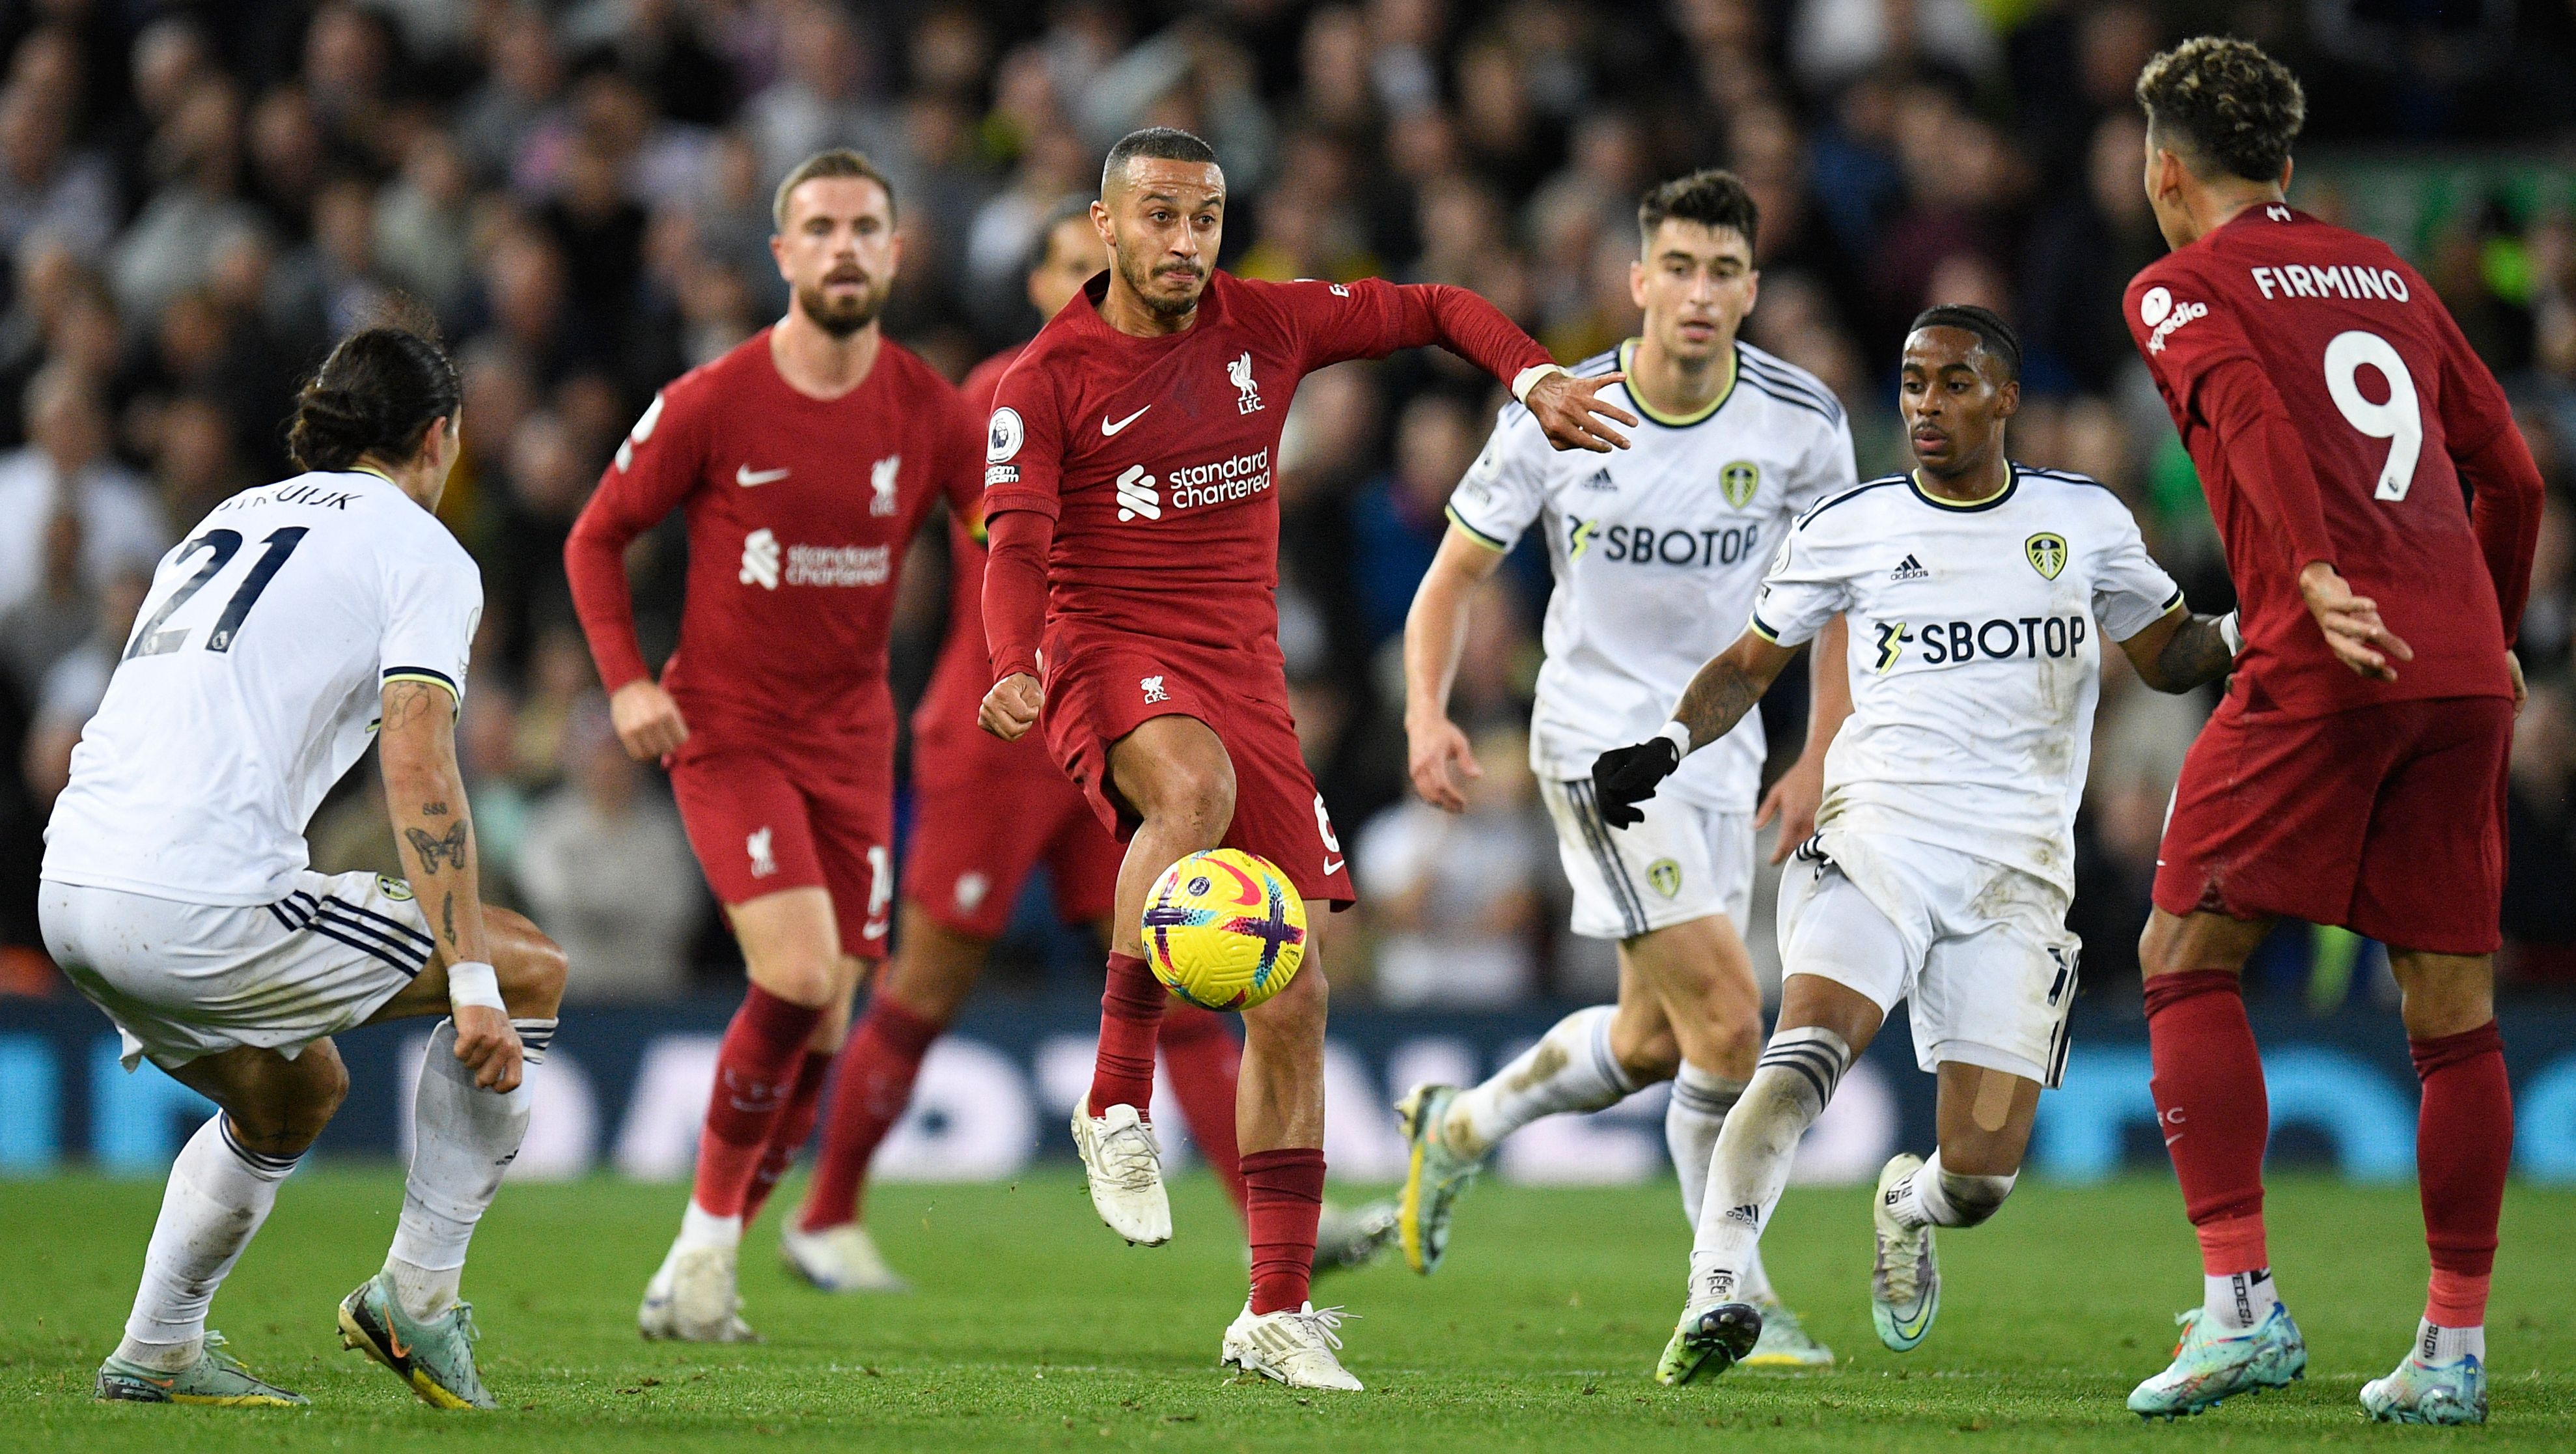 ‘What a player’ – Jose Enrique blown away by £200k-p/w Liverpool man as £50m Man City point made